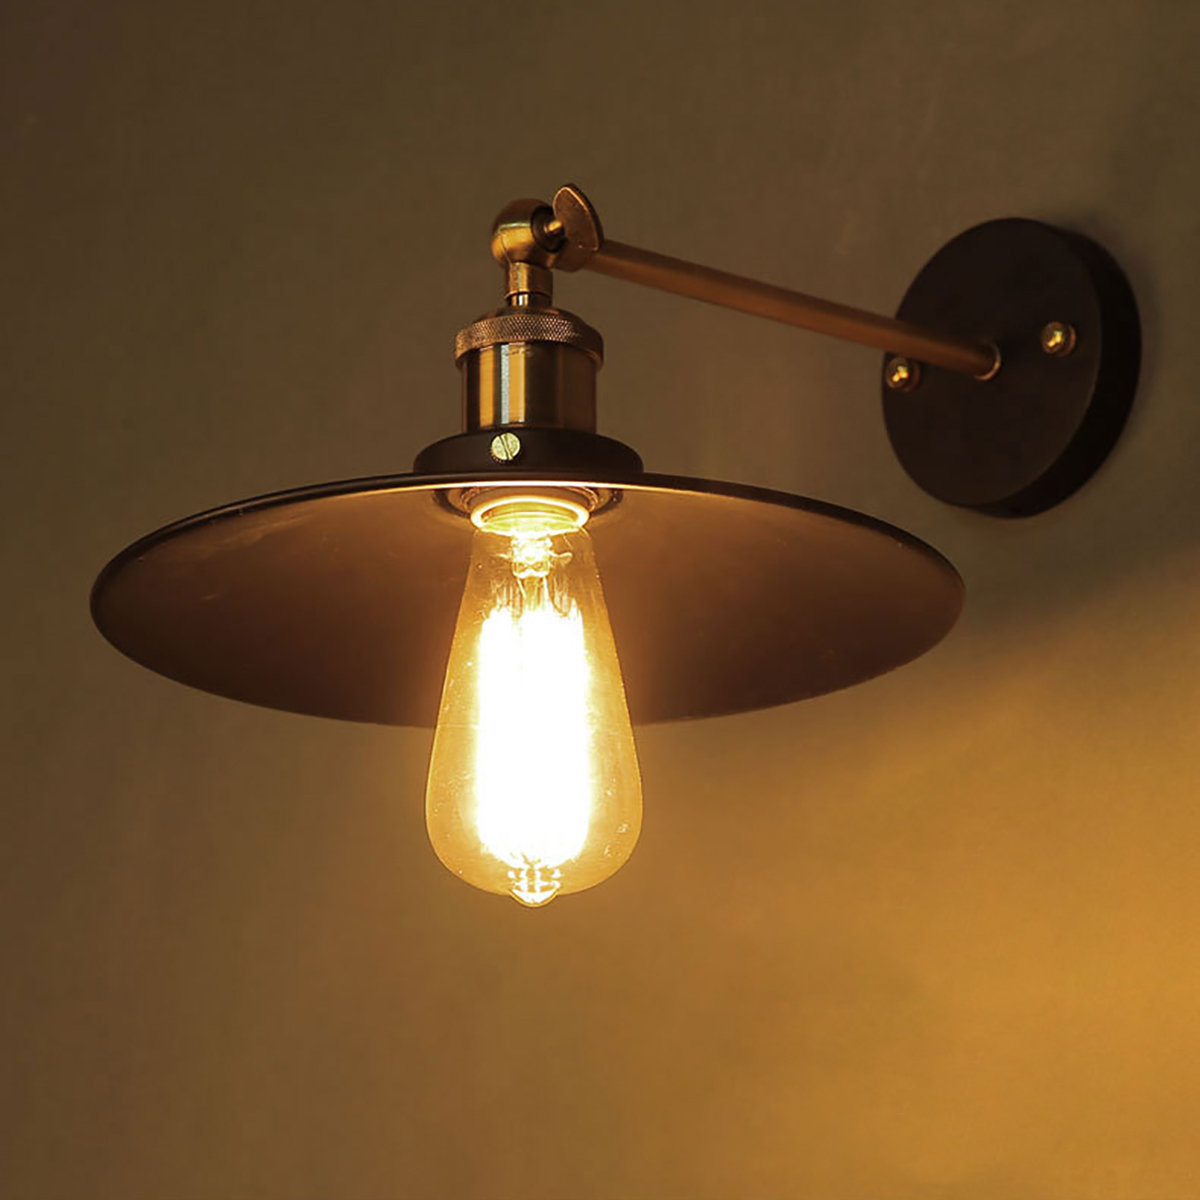 E26-Retro-Metal-Hanging-Wall-mounted-Light-Cover-American-Style-Lampshade-with-Swing-Arm-AC220V-1719676-5